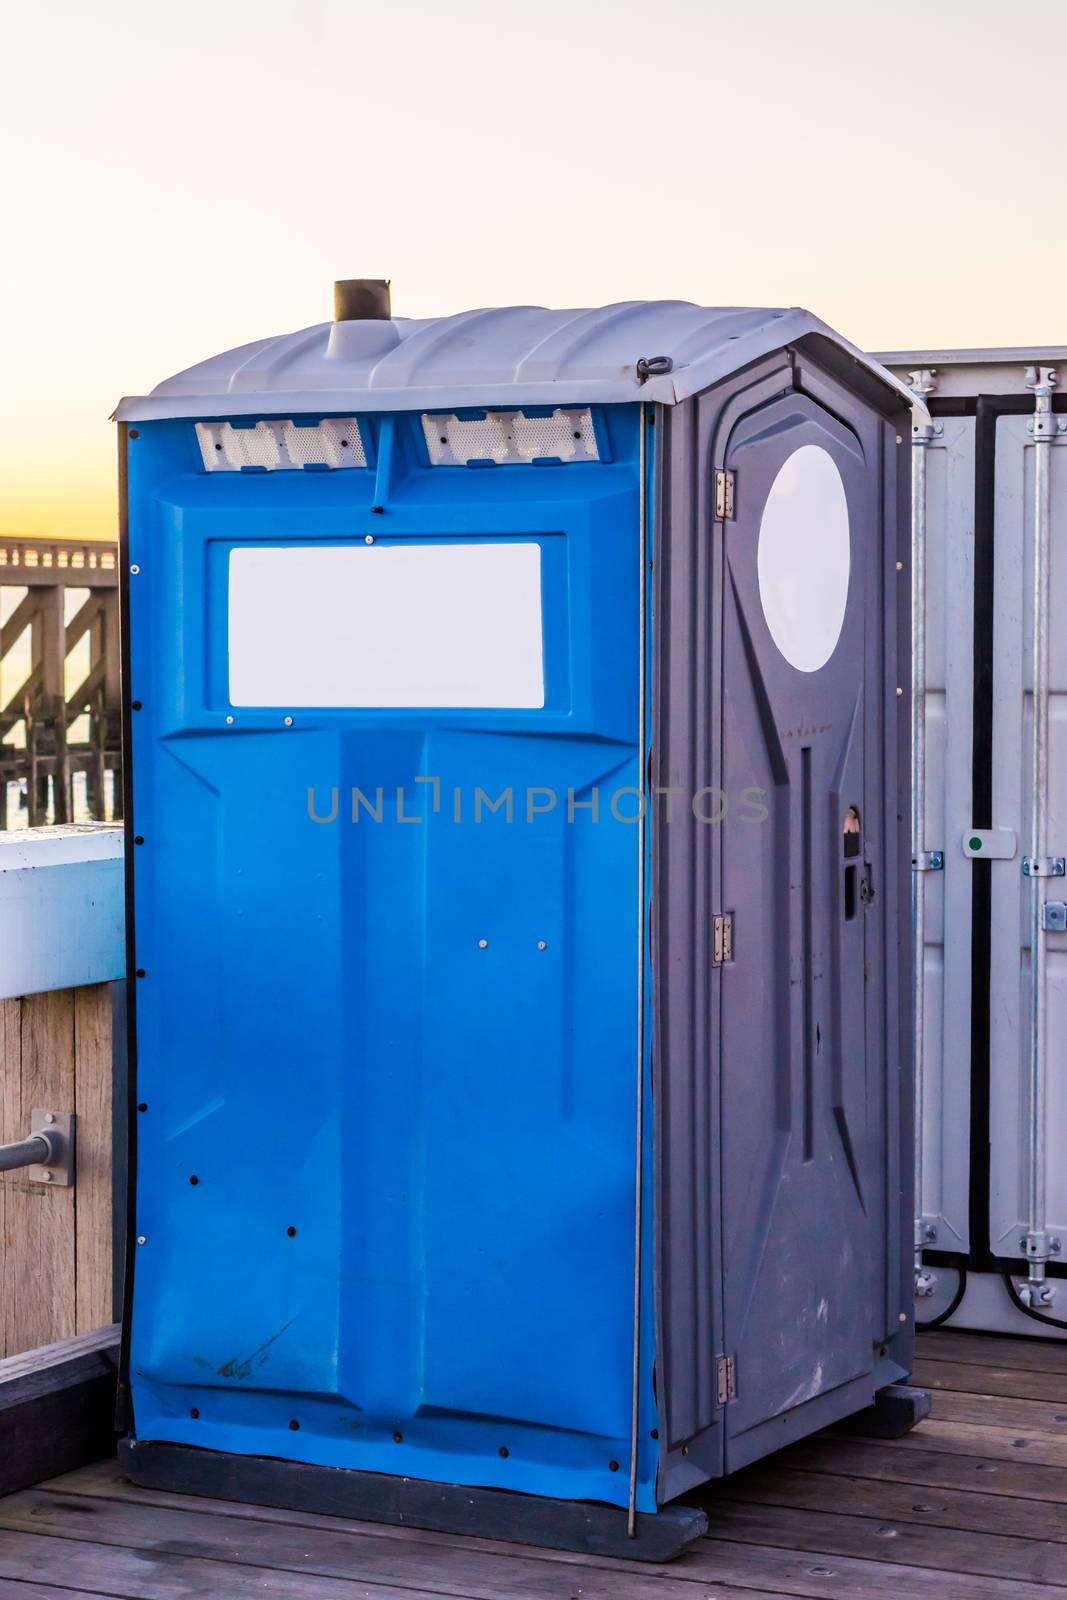 portable toilet box, popular mobile sanitary for events and construction sites by charlottebleijenberg